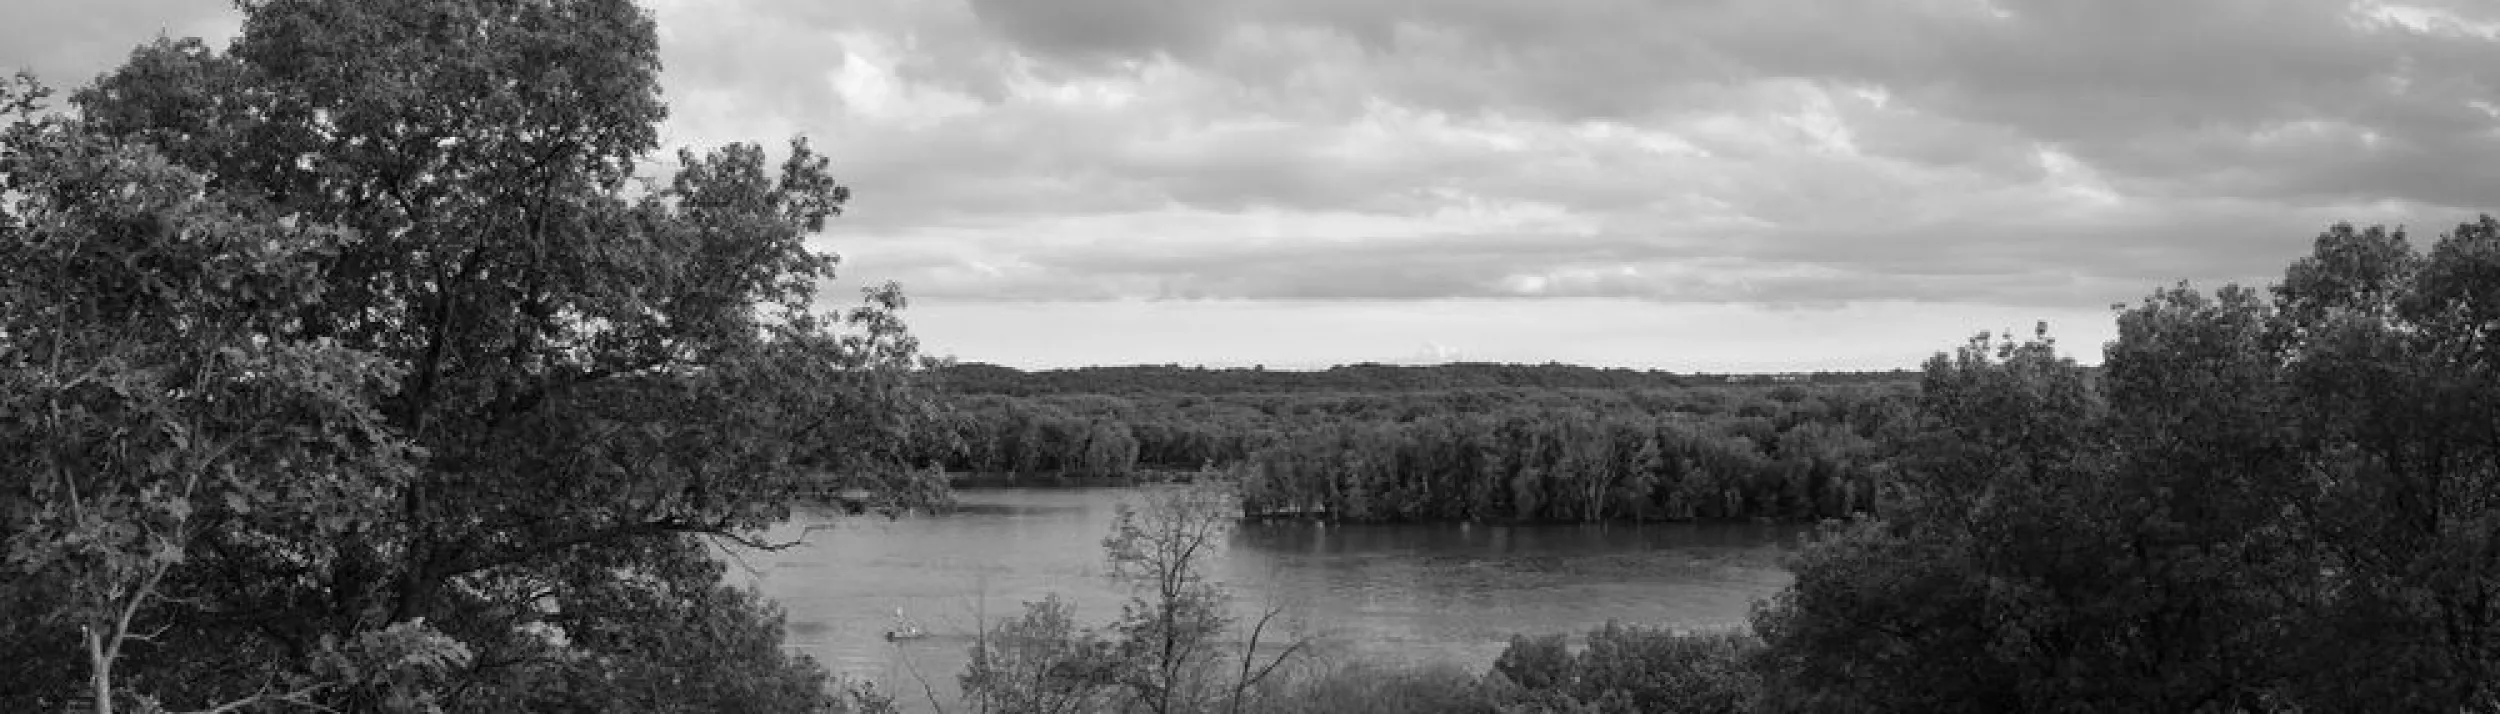 Black and white photo of a lake with trees.